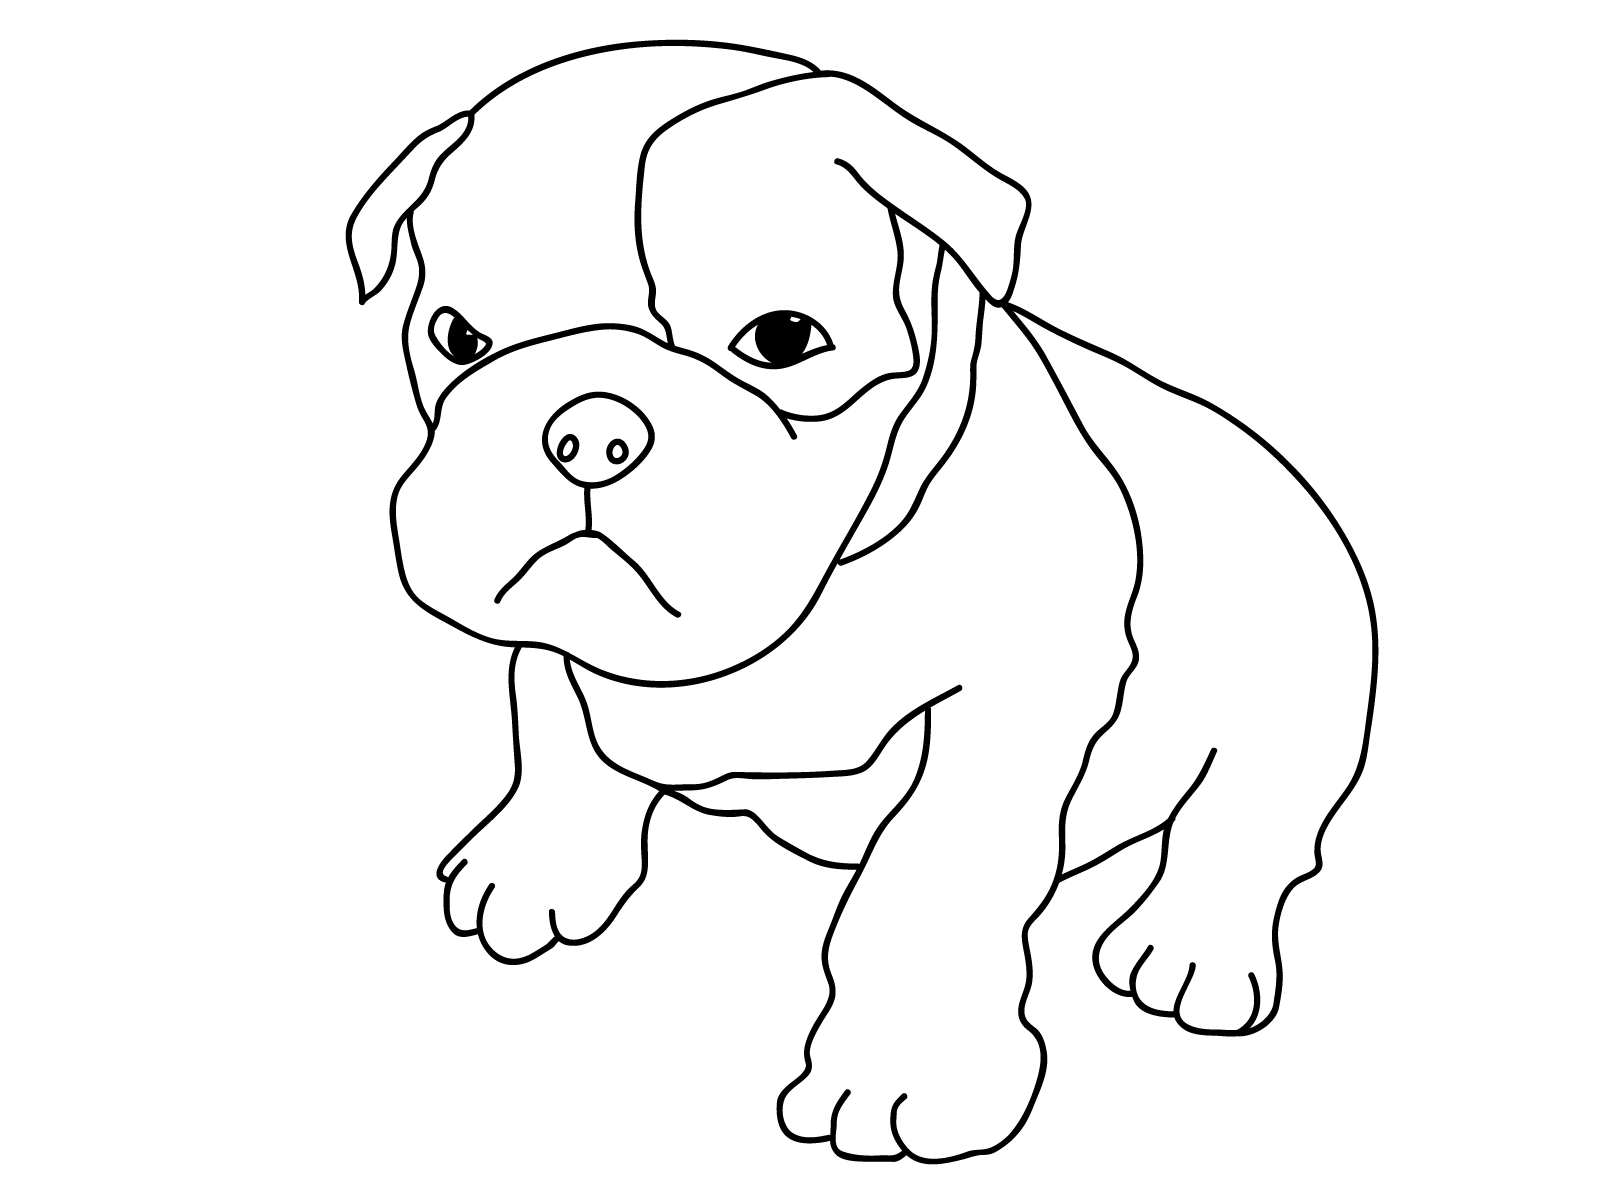 Preschool Color by Number 49+ Coloring Pages Disney Dogs & Printables - Education.com